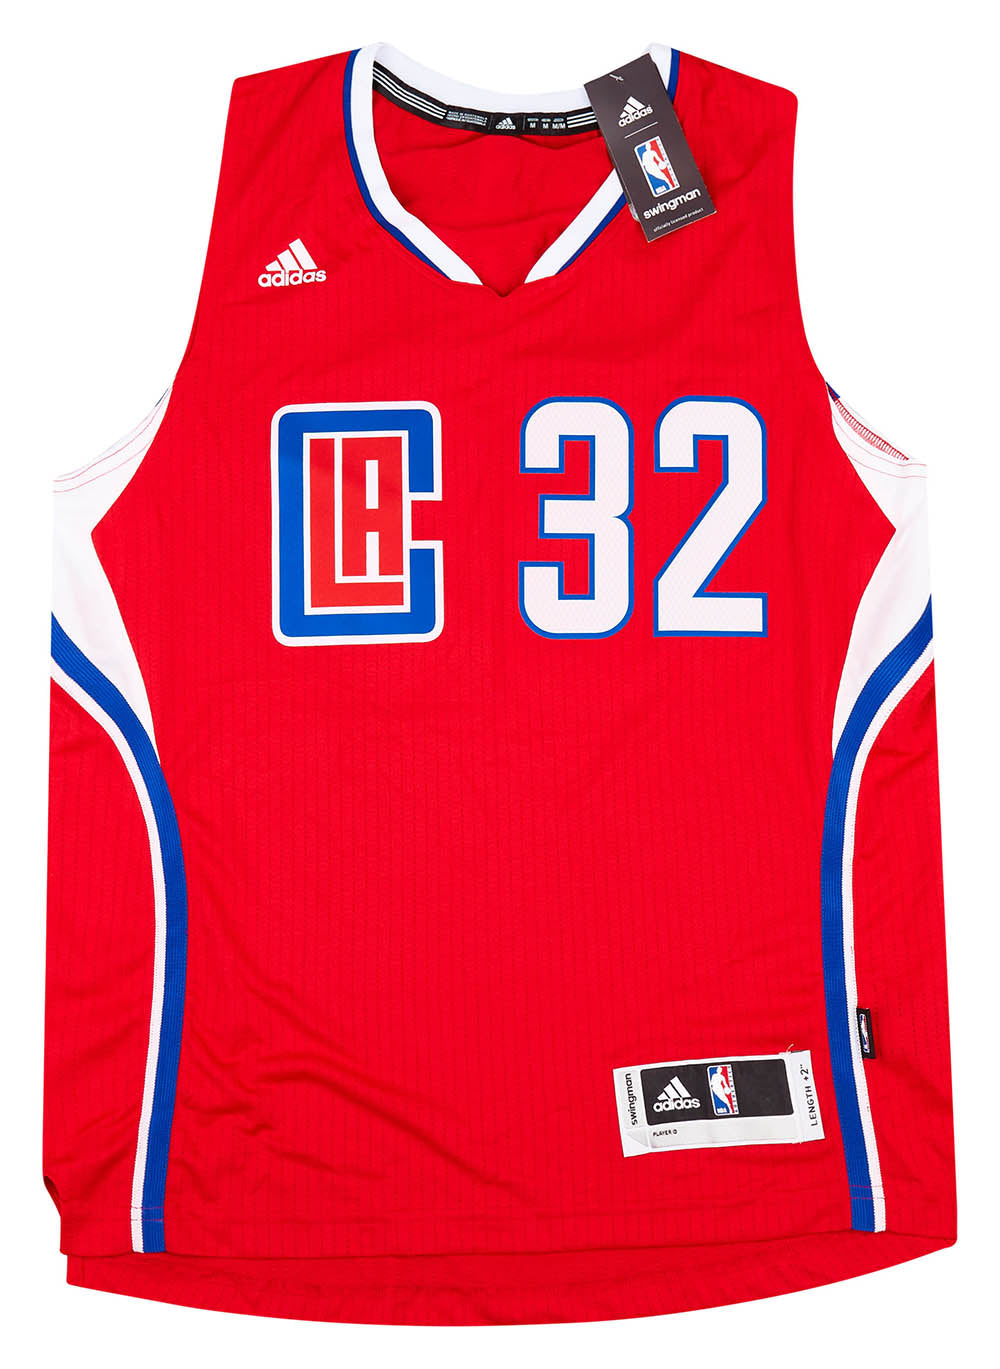 Blake Griffin Los Angeles Clippers #32 Jersey Size Large